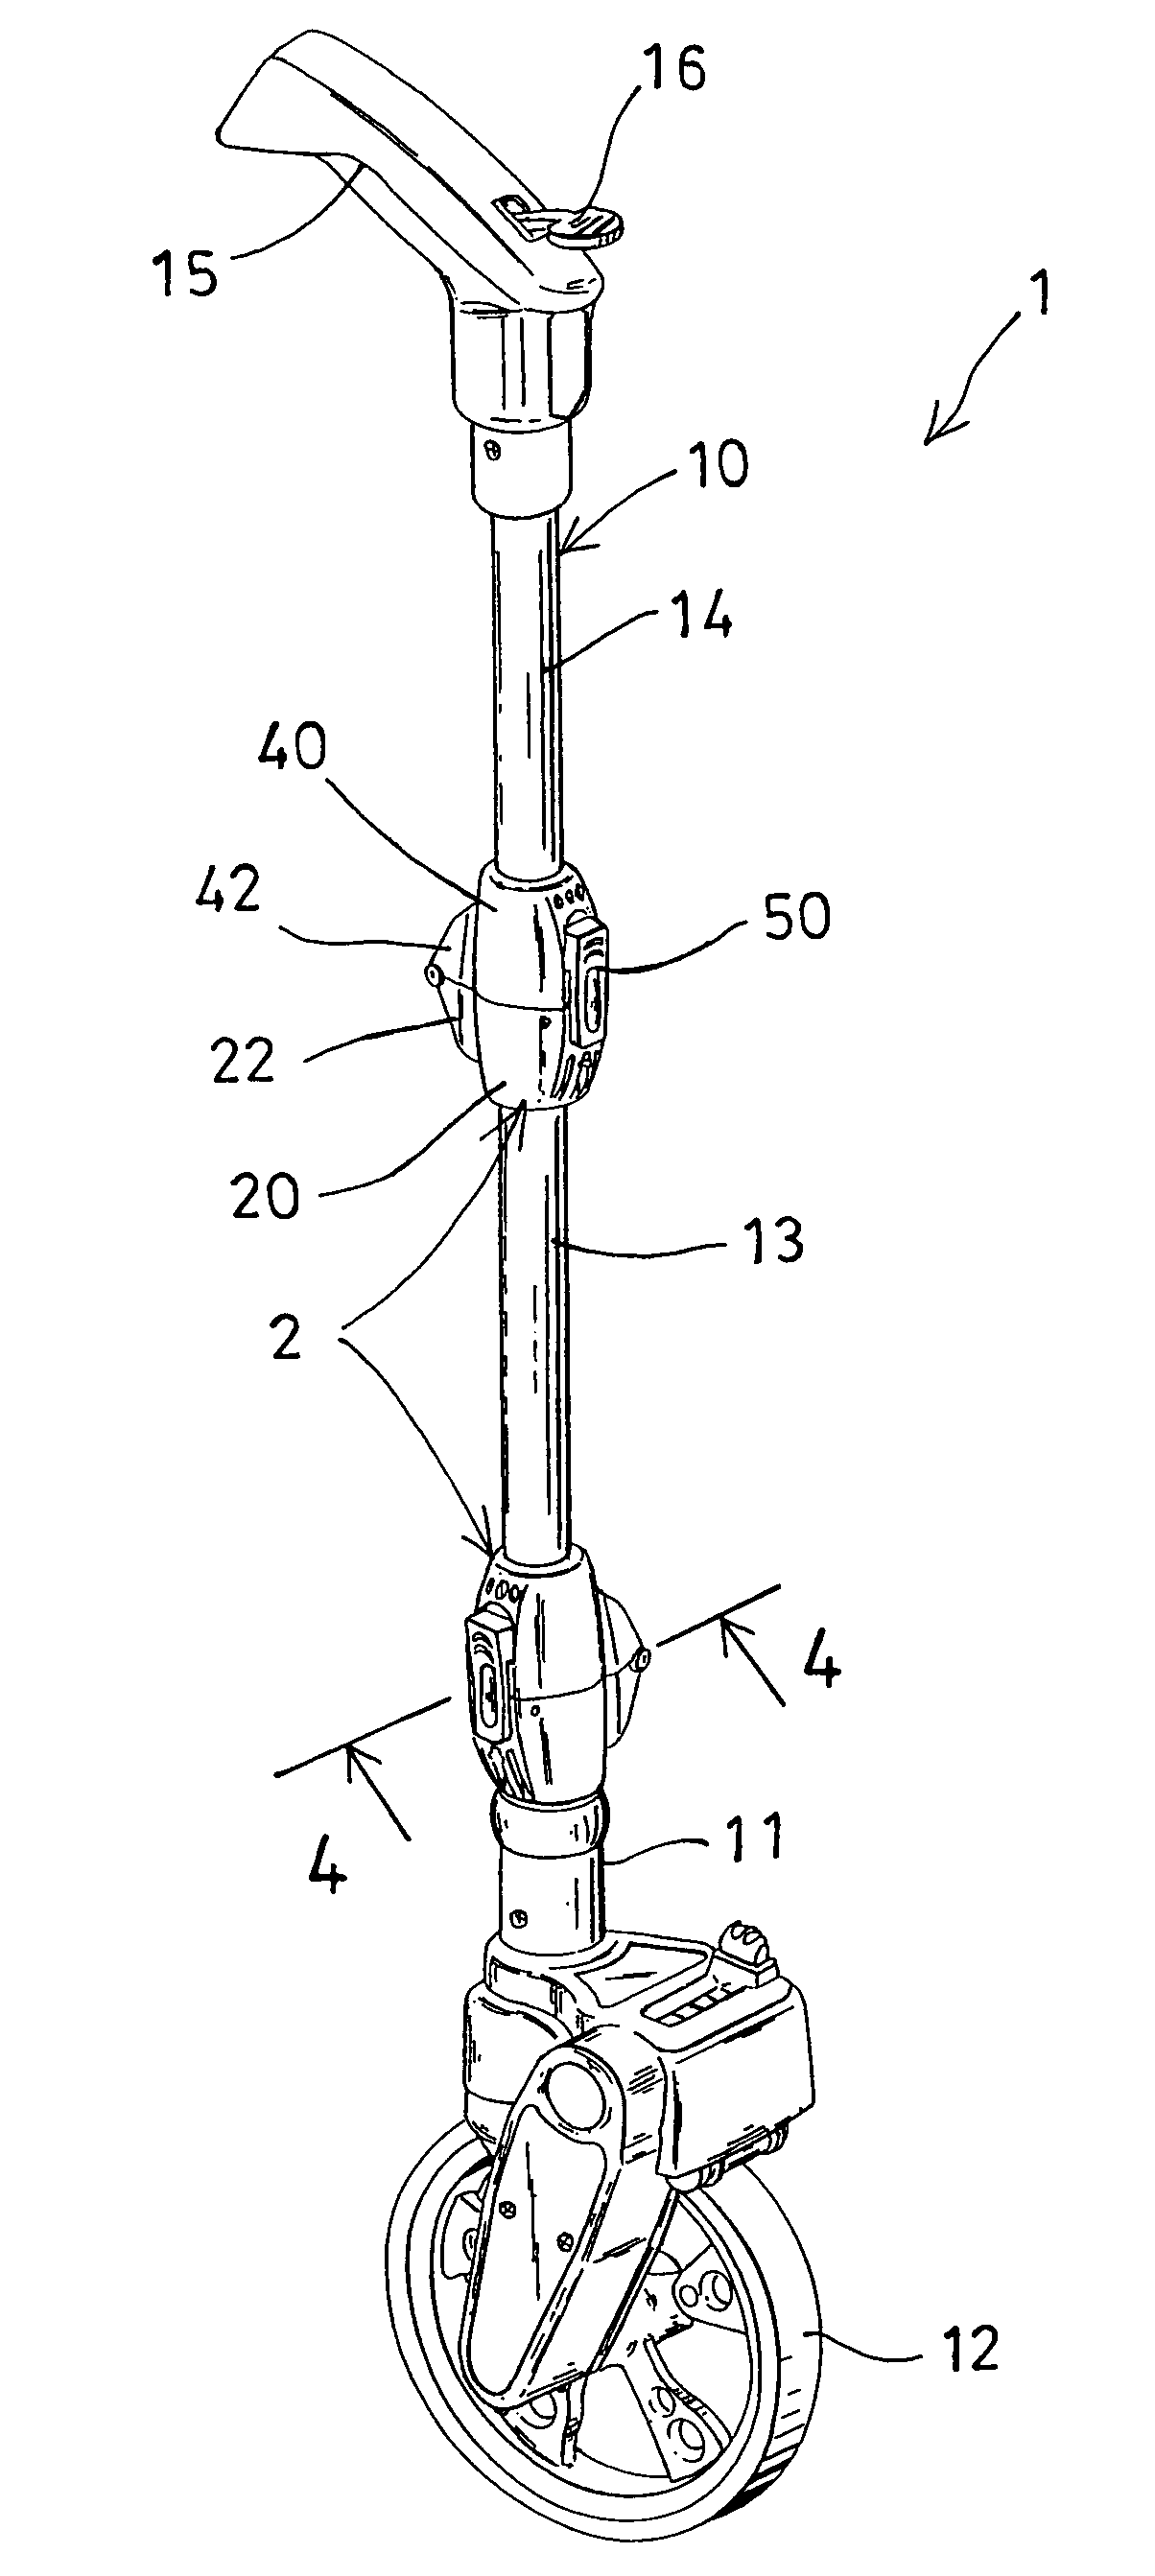 Wheeled distance measuring device